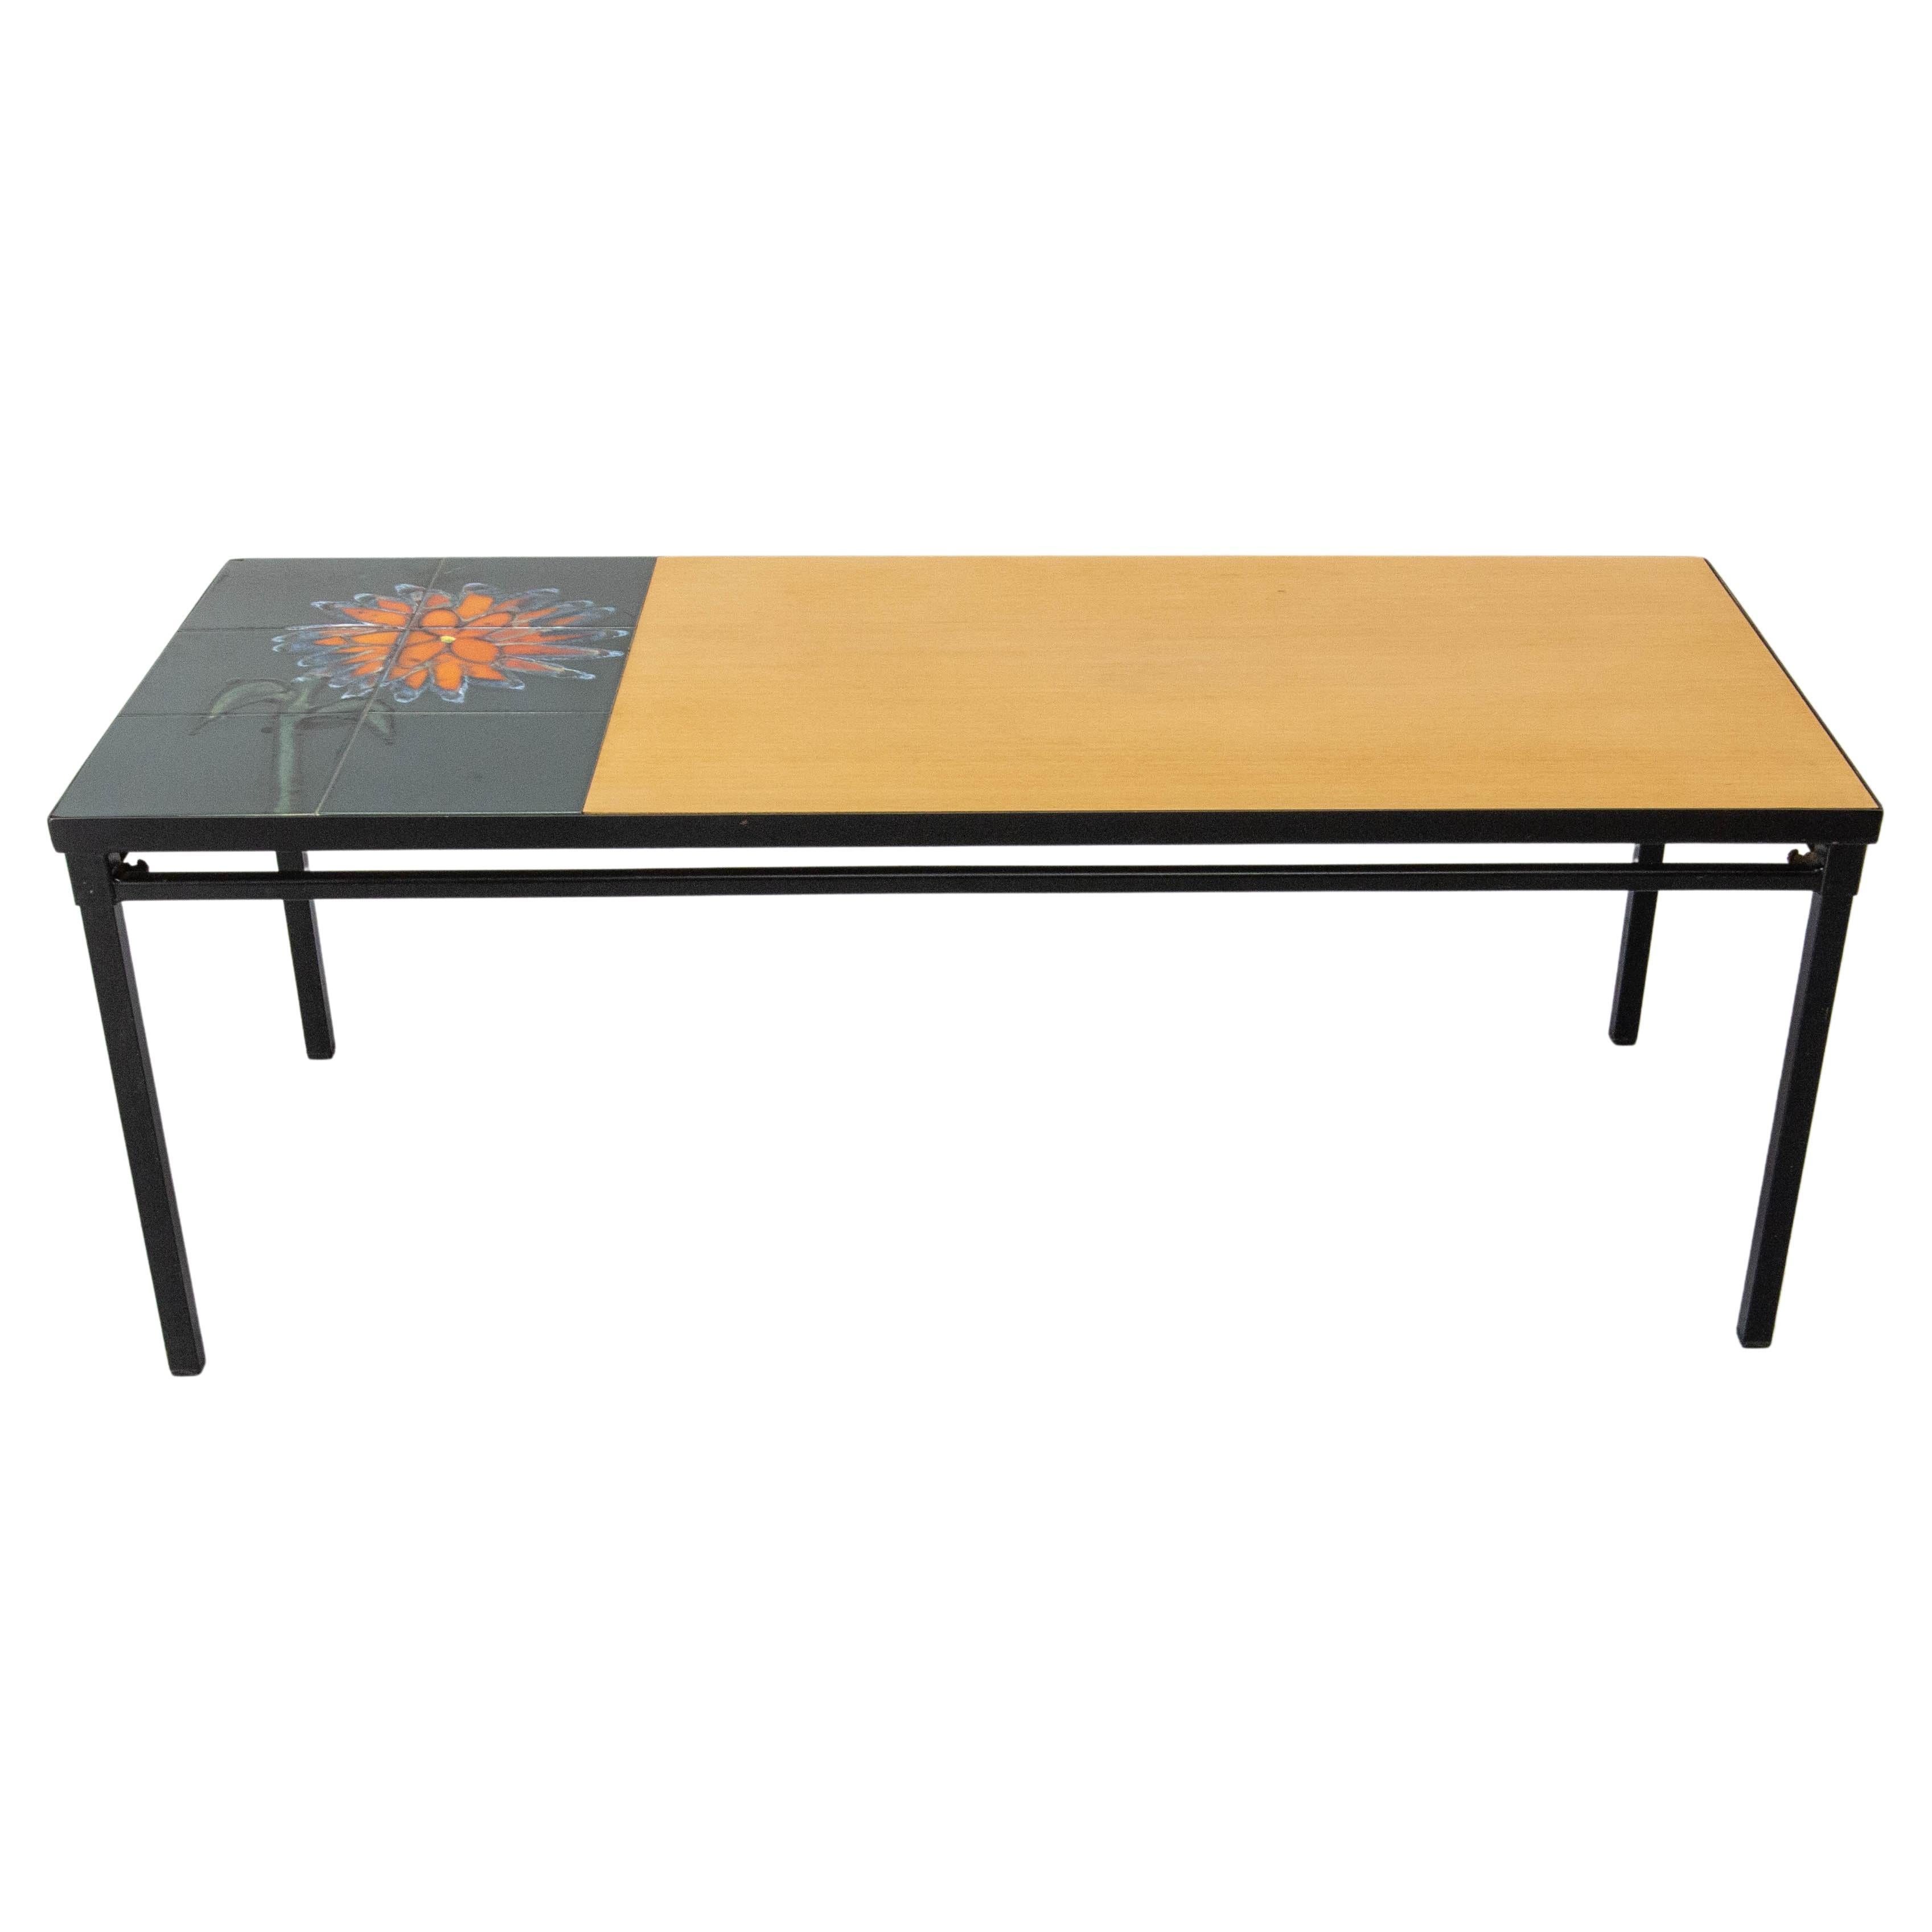 French Coffee Table Vallauris Glazed Ceramics Poplar and Iron, circa 1970 For Sale